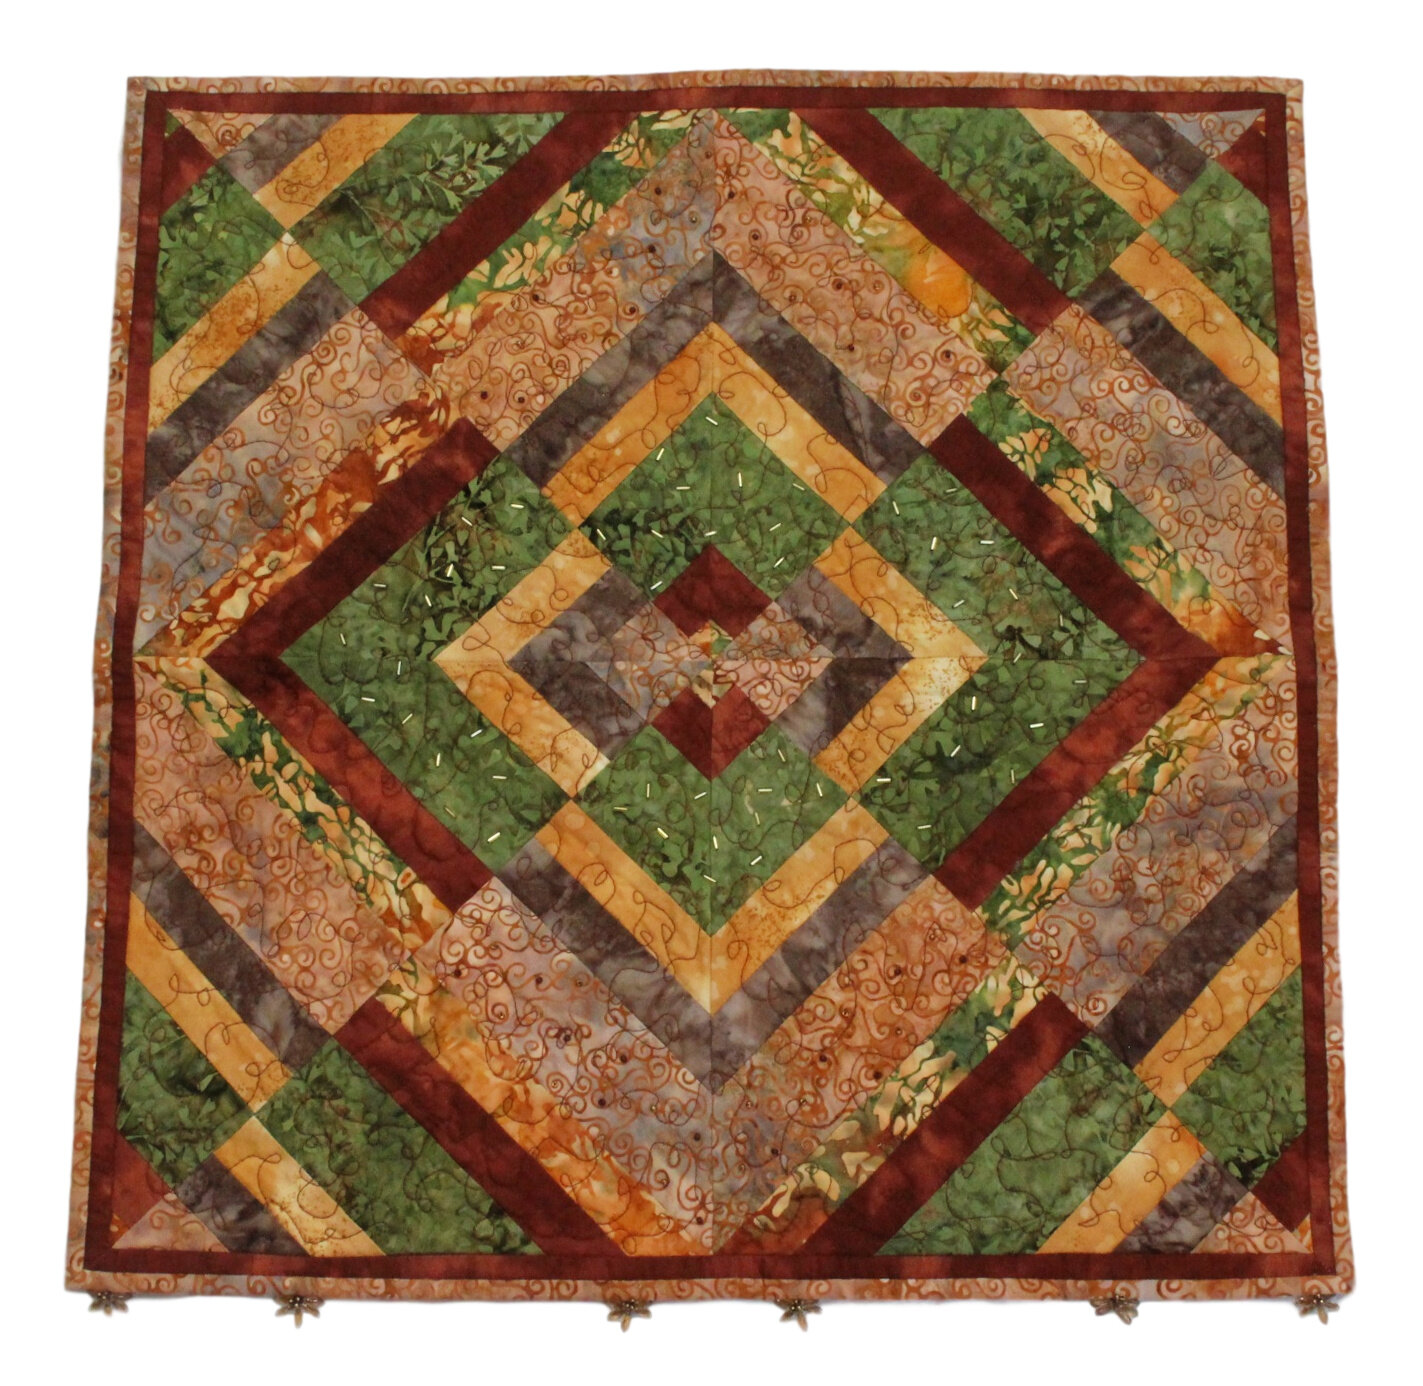 Brown quilt_clipped_rev_1.jpg